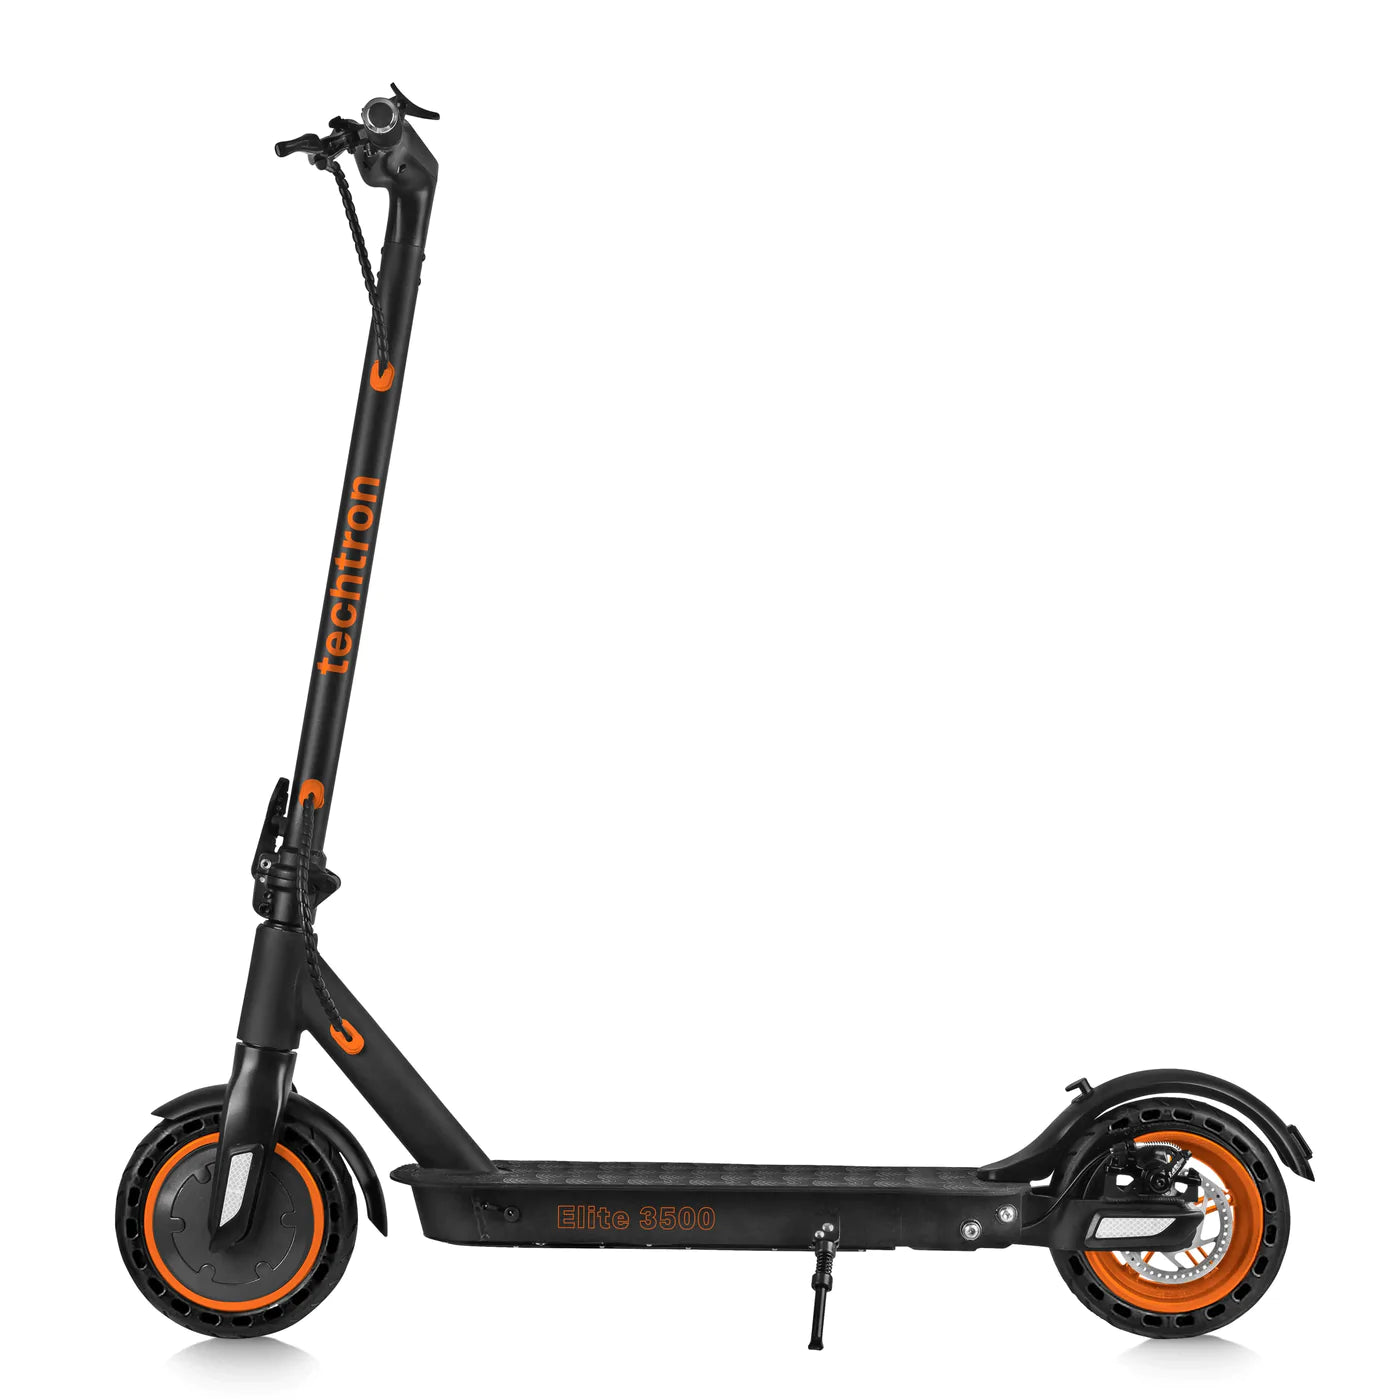 Techtron® Elite 3500 Electric Scooter style look